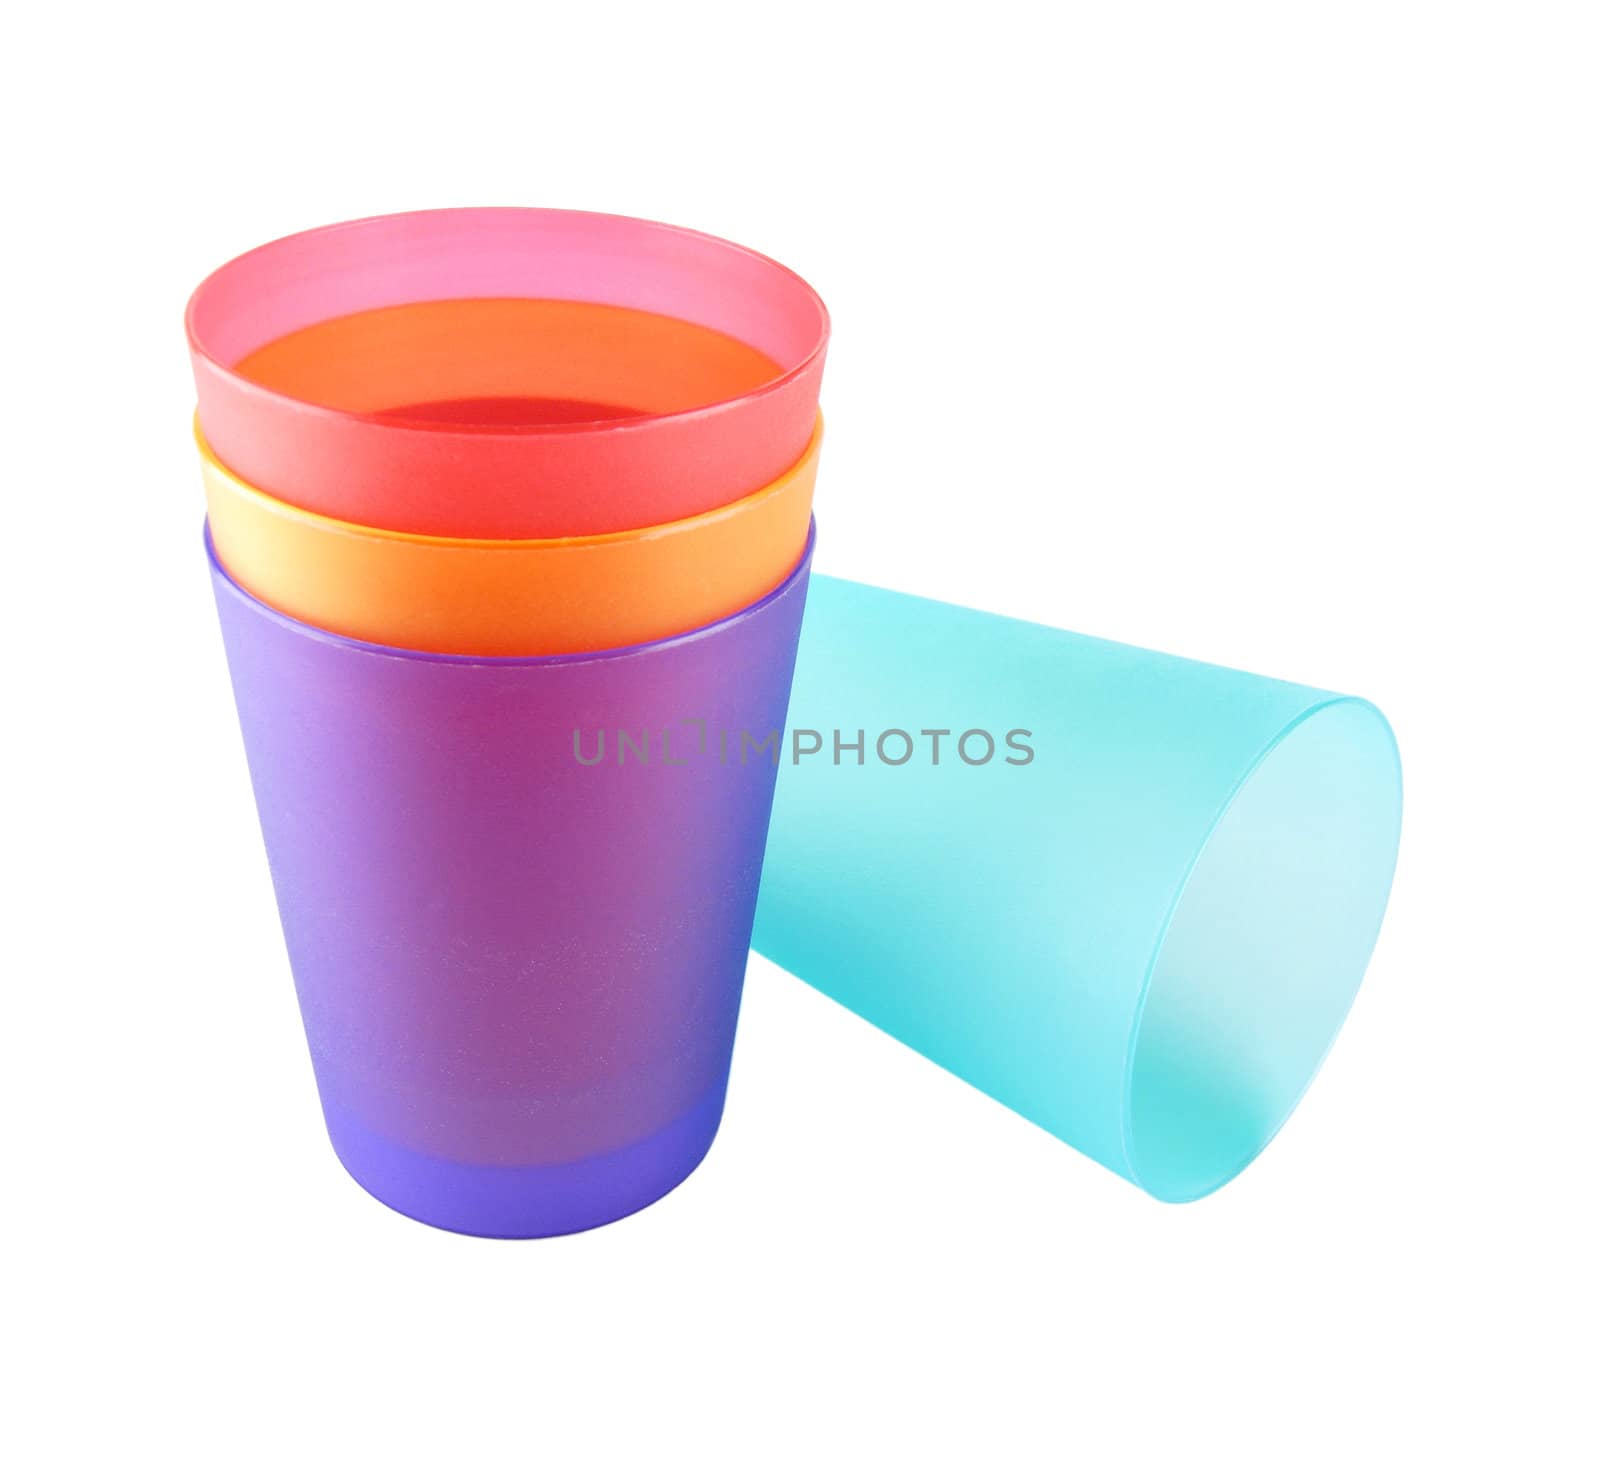 Colorful plastic cups by kekanger